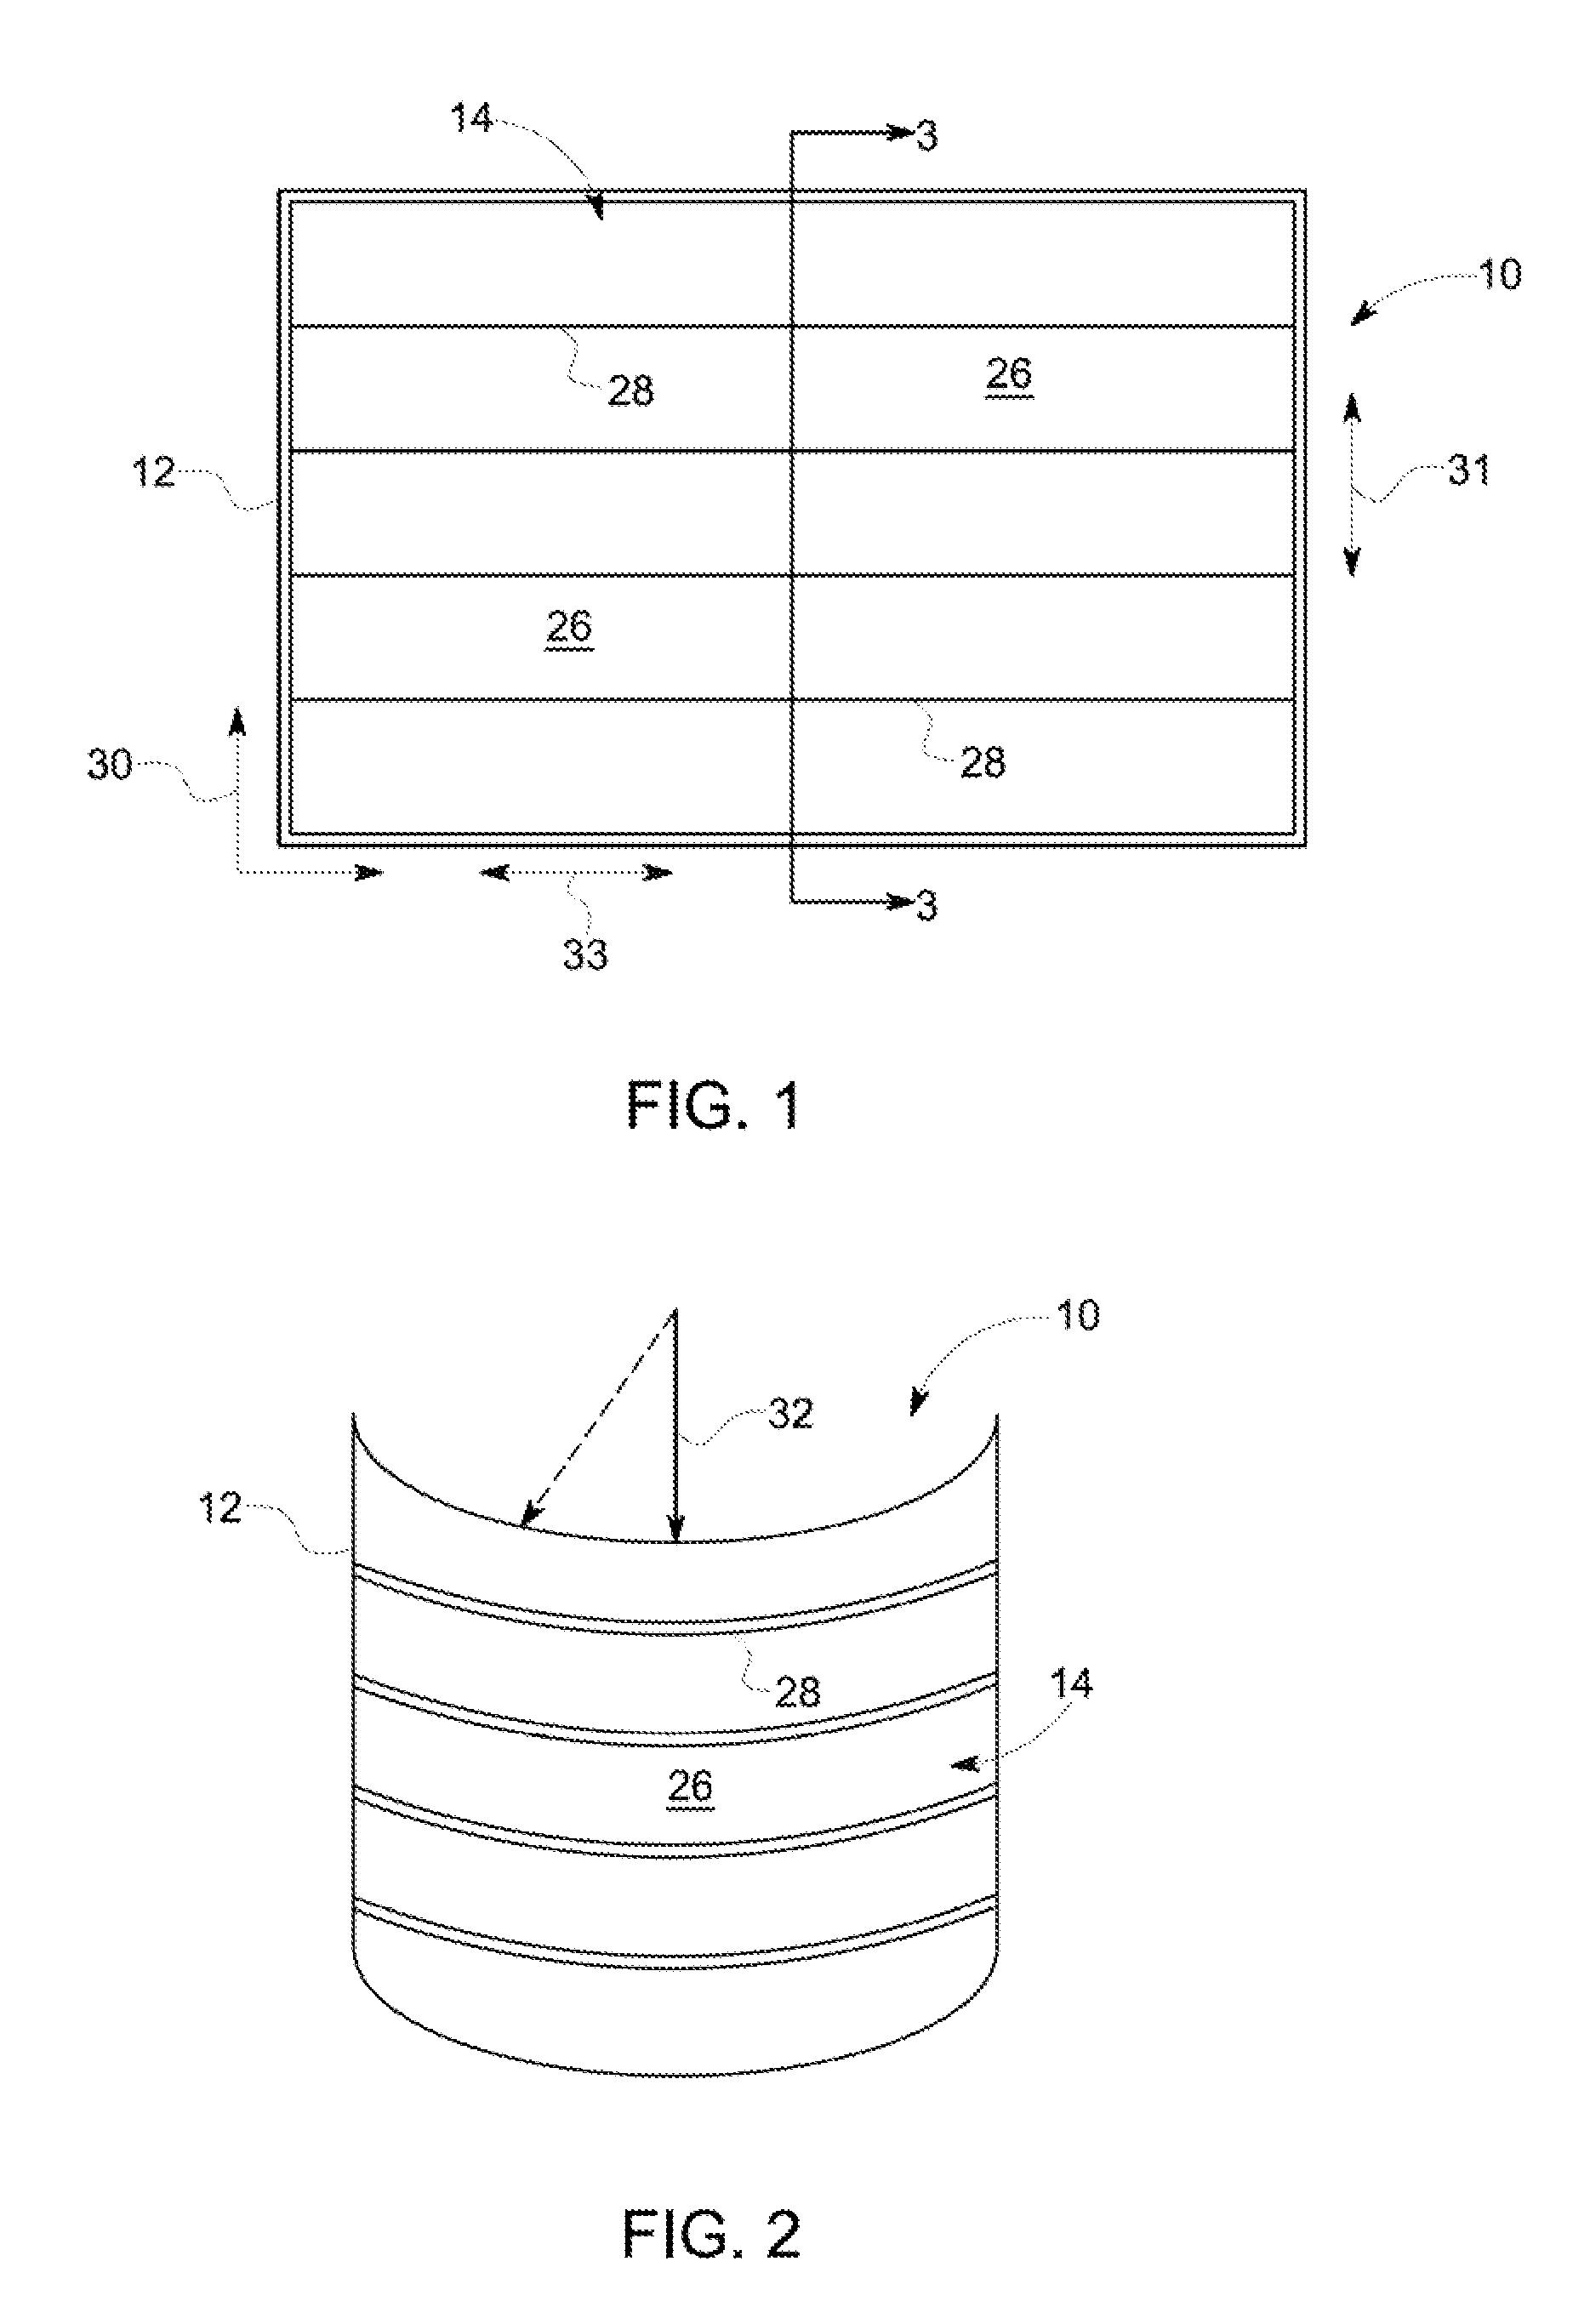 Multi-structure cathode for flexible organic light emitting diode (OLED) device and method of making same